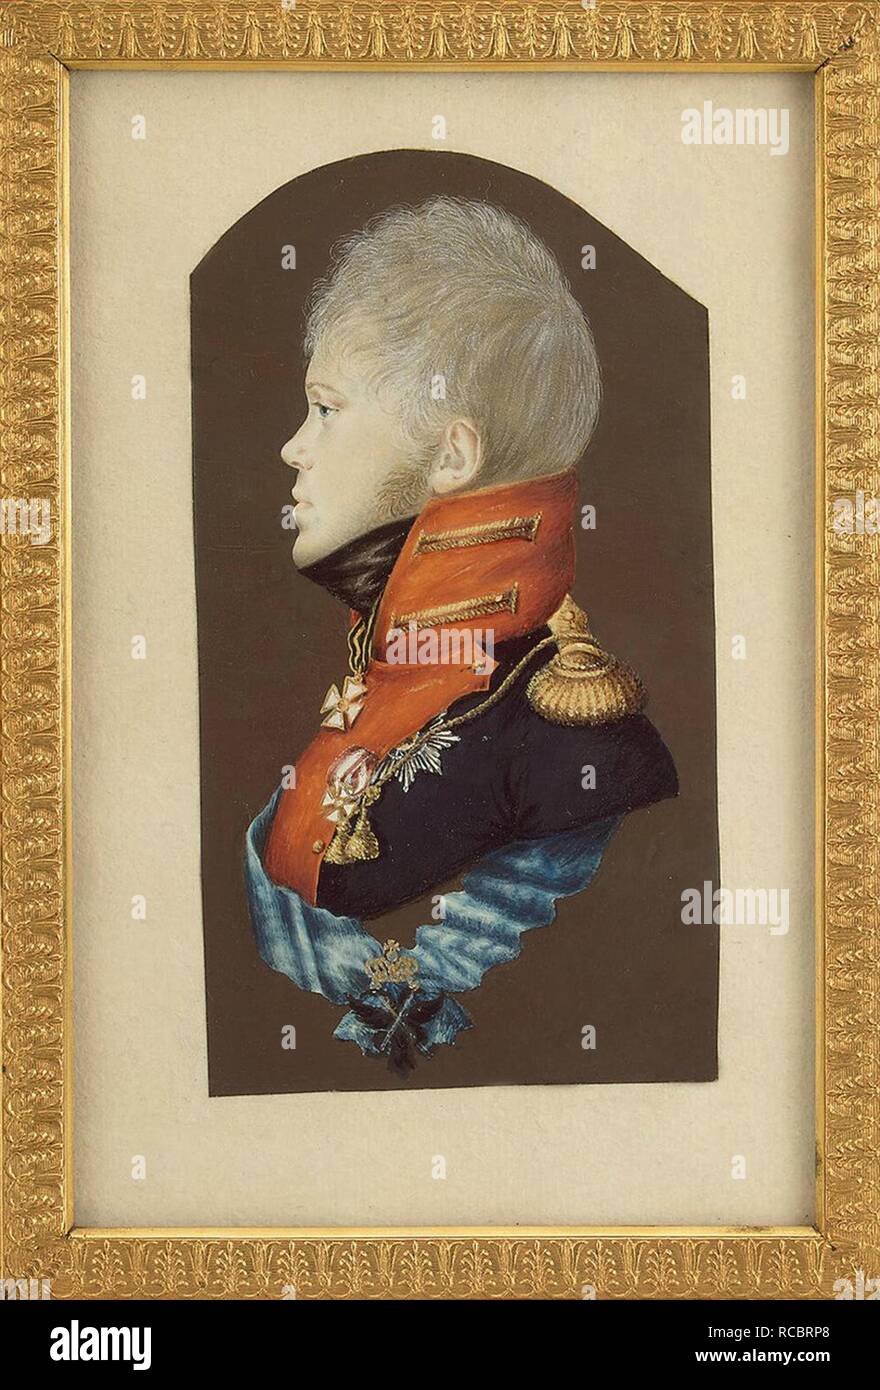 Portrait of Crown Prince Constantine Pavlovich of Russia (1779-1831). Museum: State Hermitage, St. Petersburg. Author: Rockstuhl, Peter Ernst. Stock Photo